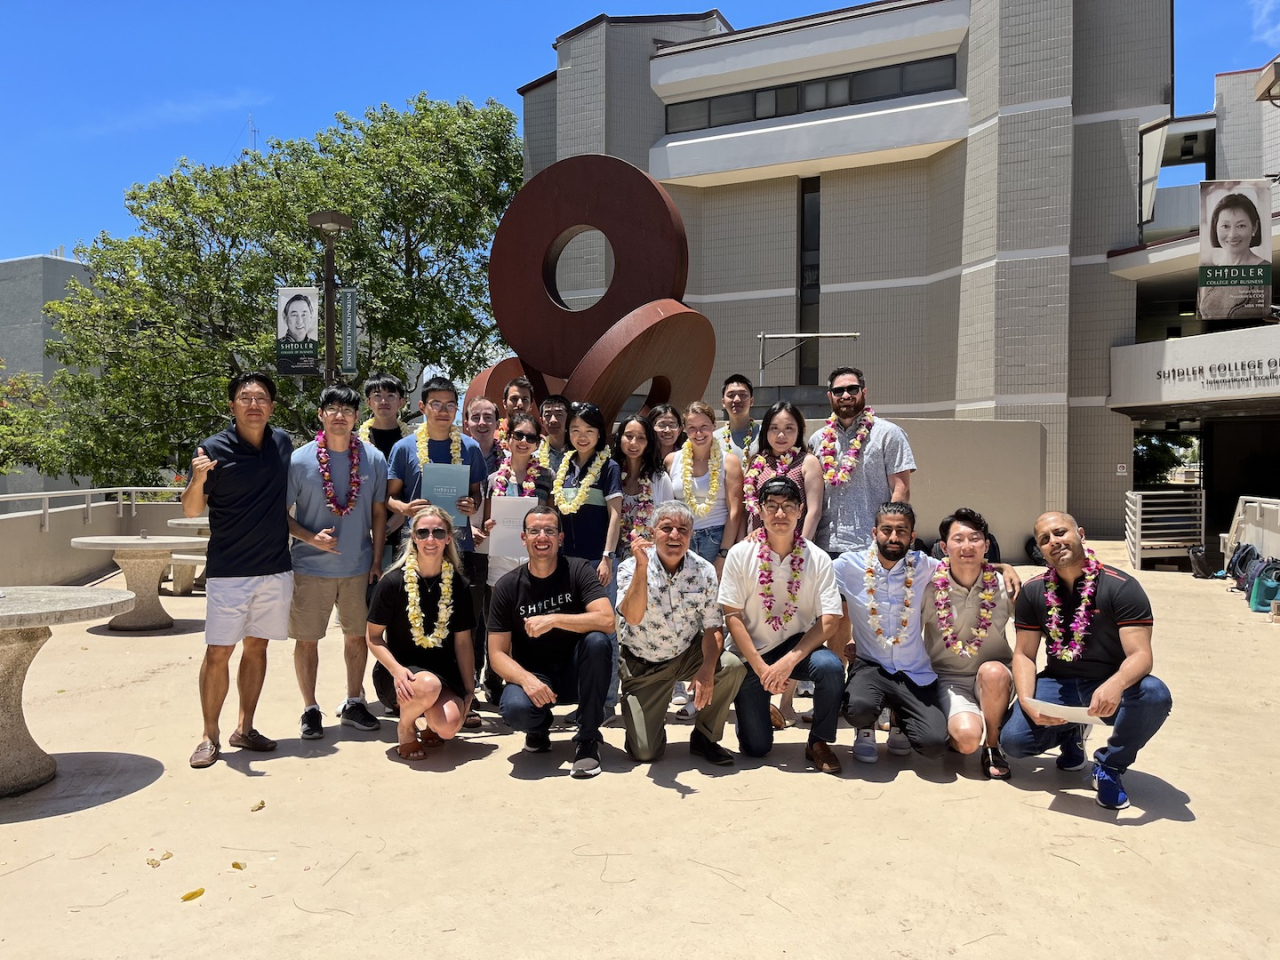 HARDI participants pose for a photo at the Shidler College of Business.